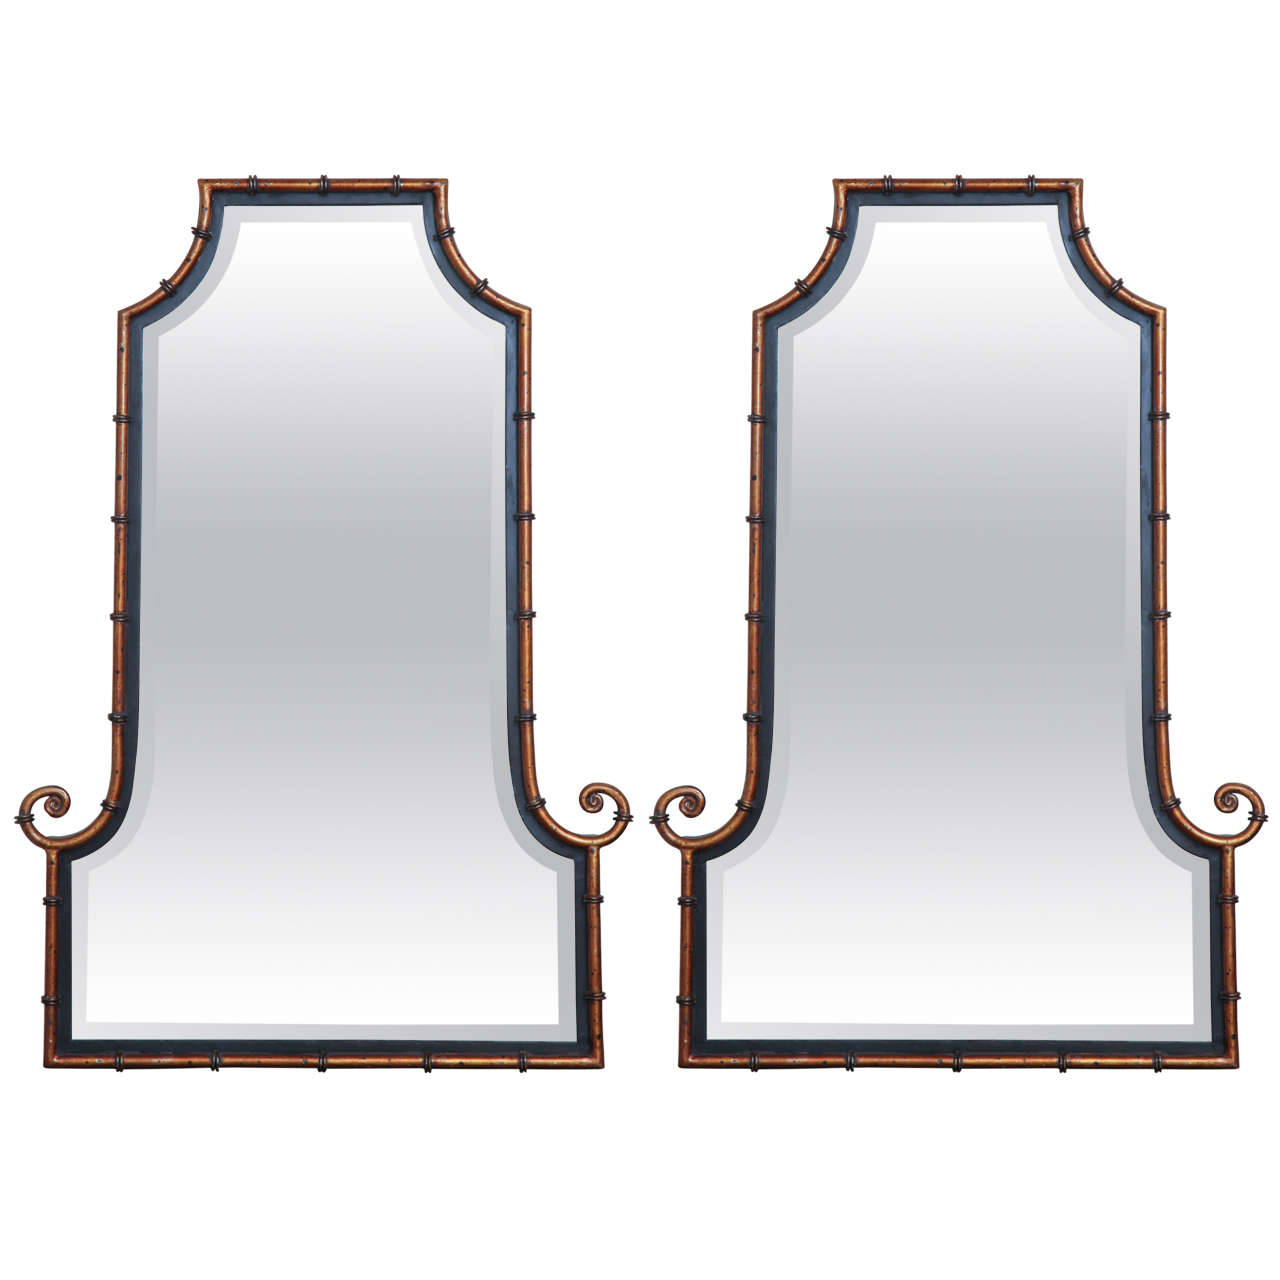 Pair of Painted Asian Inspired Mirrors, circa 1950